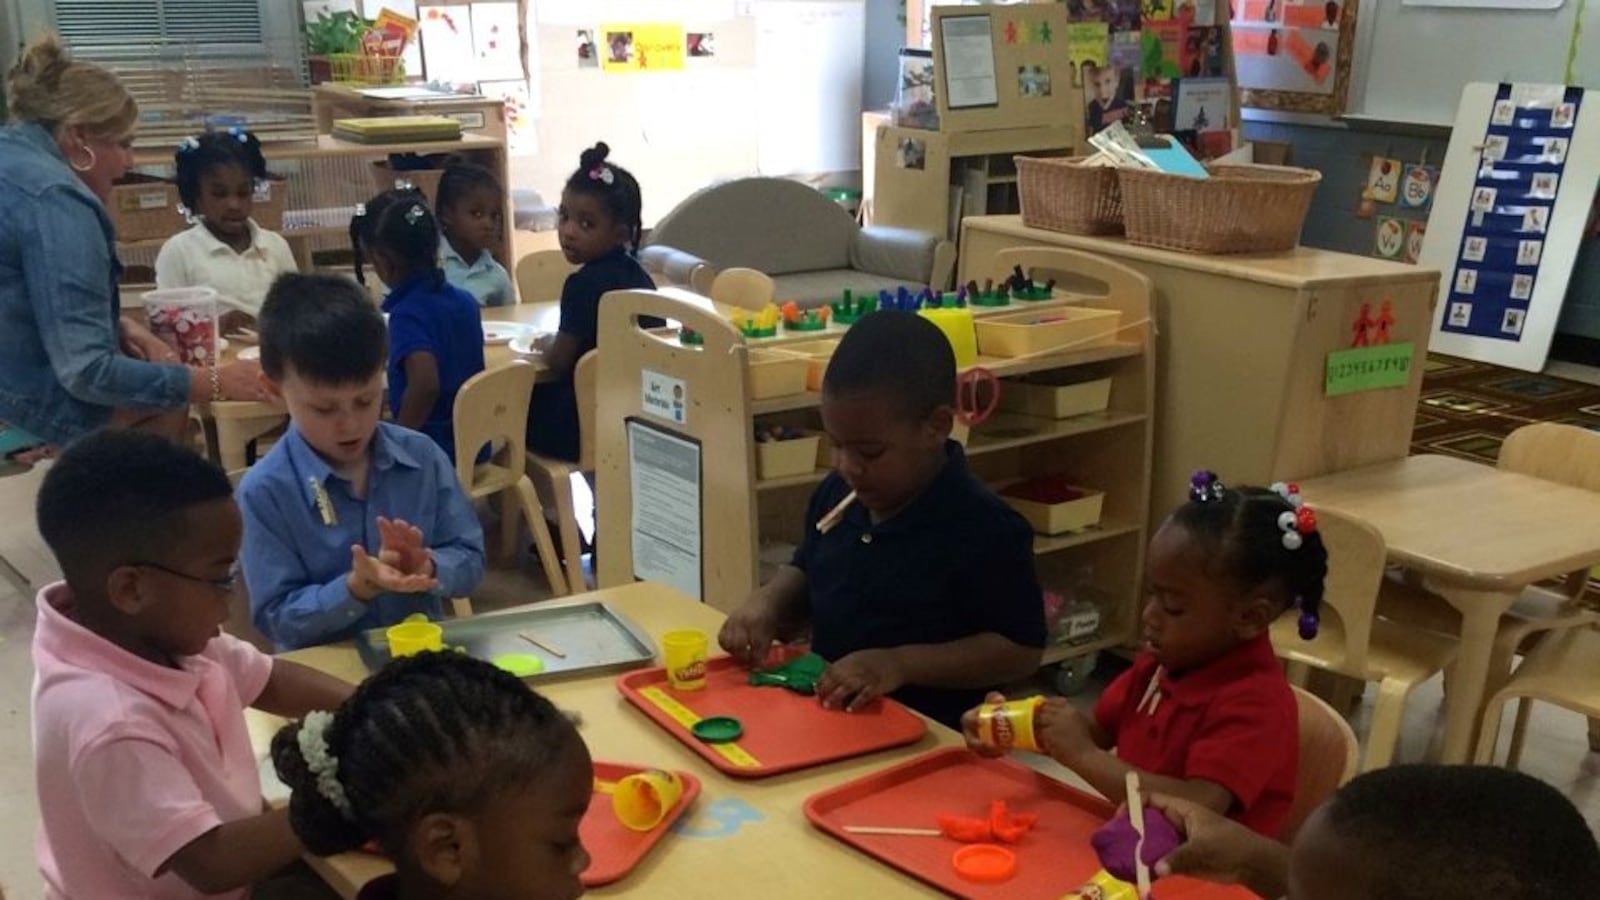 Students at Bordeaux Early Learning Center in Nashville create and sculpt with Play-Doh.